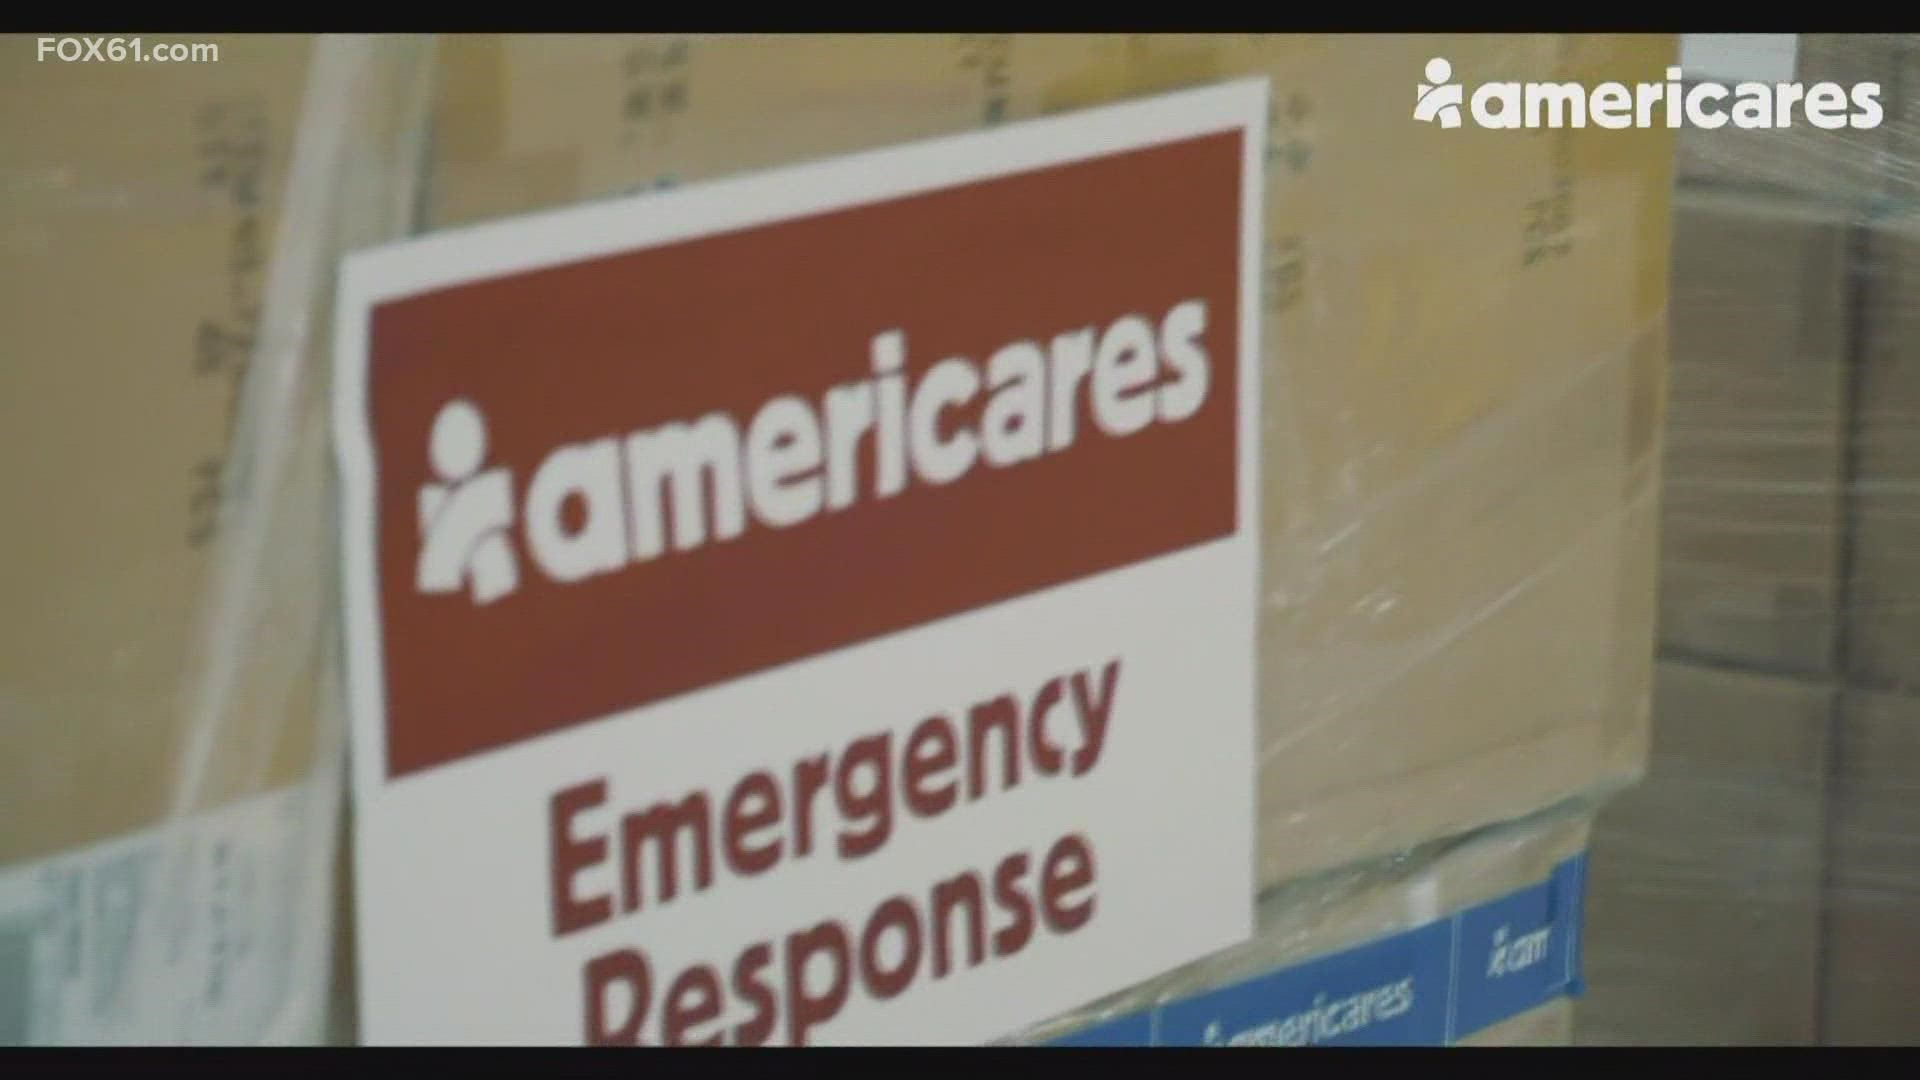 Stamford-based Americares is one organization that is responding.